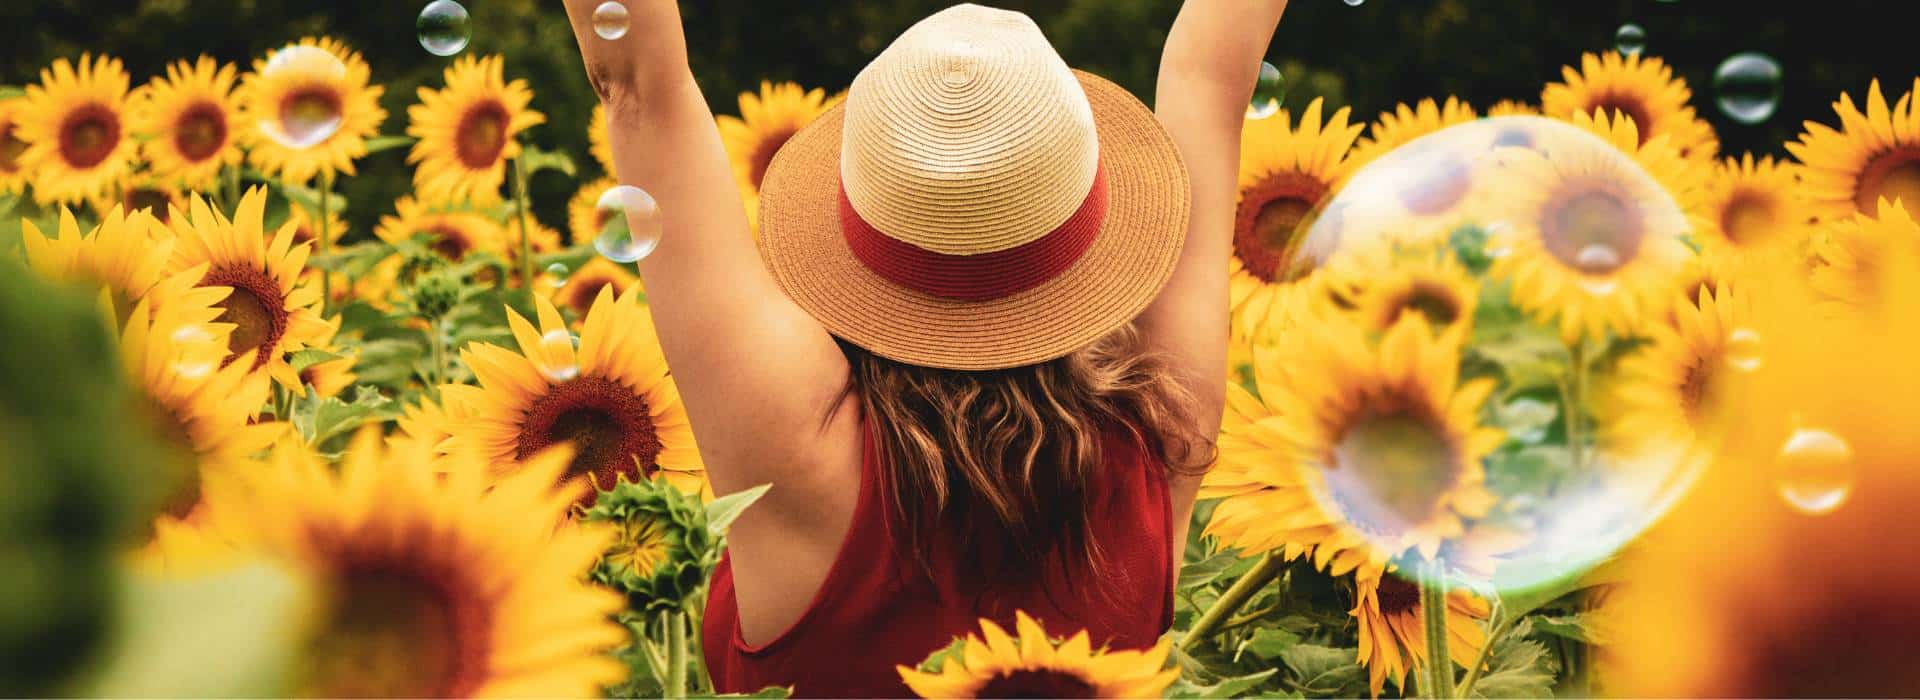 Woman with arms raised standing in a field of sunflowers | Activate your Solar Plexus Chakra Fire! | Shine Body & Bath Chakra Soap | Blog